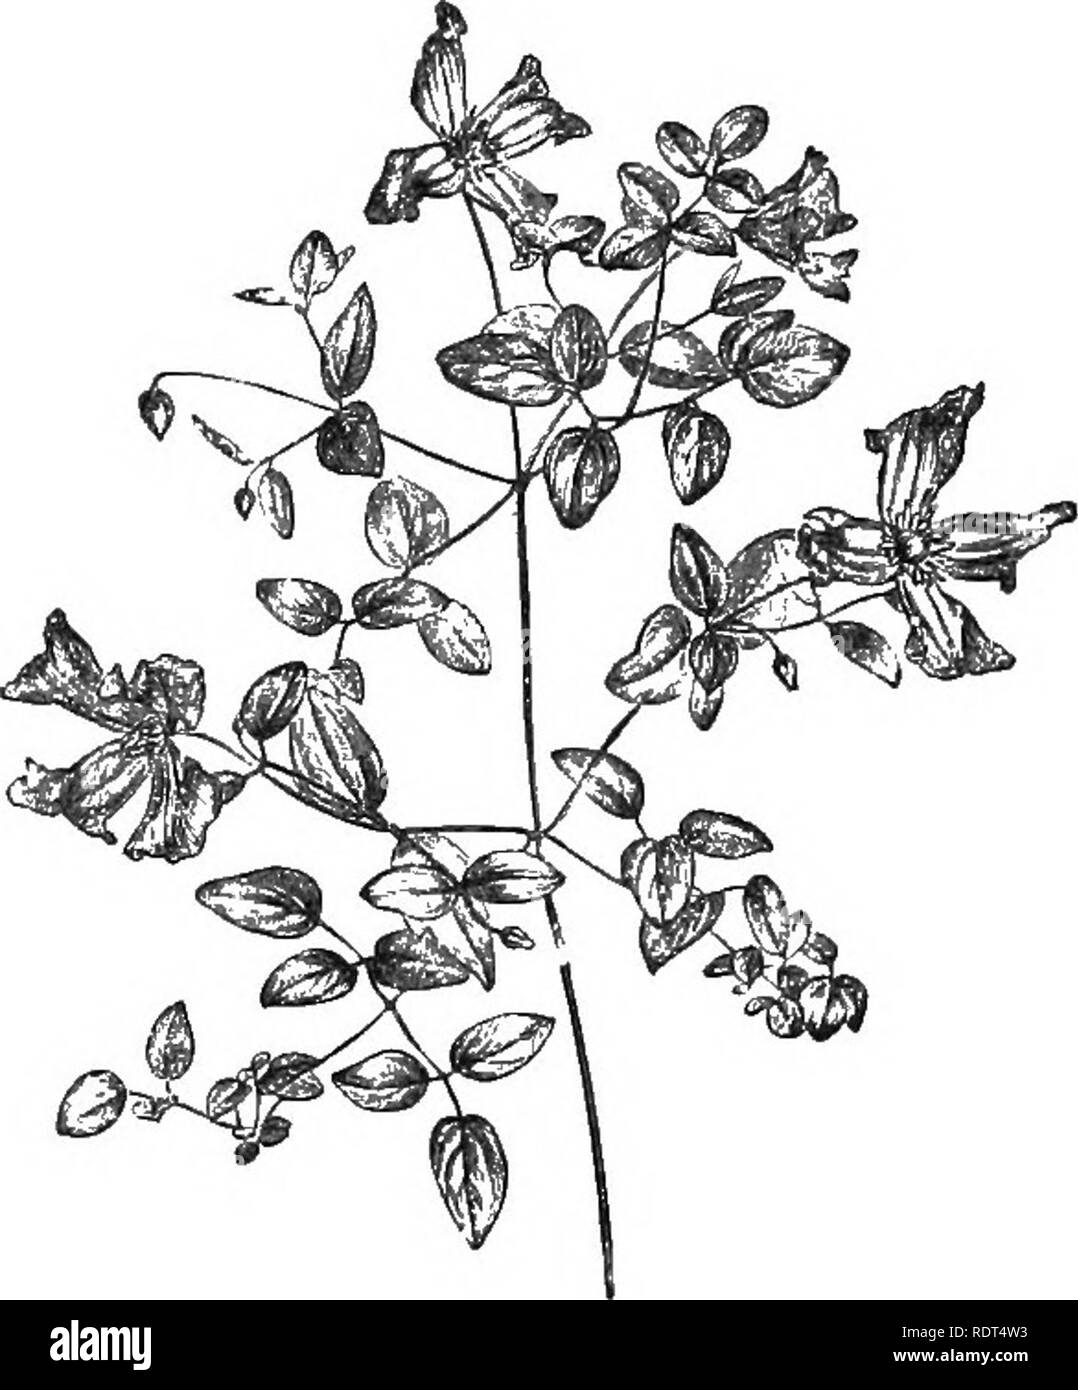 . Handbook of hardy trees, shrubs, and herbaceous plants ... Based on the French work of Messrs. Decaisne and Naudin ...entitled 'Manuel de l'amateur des jardins,' and including the original woodcuts by Riocreux and Leblanc. Plants, Ornamental. Fig. 1. Clematis Viorna. (i nat. size.) Fig. 2. Clematis Viticella. (J nat. size.) 3- to 5-foliolate; leaflets narrow, 3-lobed. Flowers solitary, yellow, of medium size. Perfectly hardy. 7. G. Viticella (fig. 2).—One of the best old sorts, and, crossed with G. lanuginosa,, one of the parents of most of the gorgeous varieties raised by Mr. Jackman and ot Stock Photo